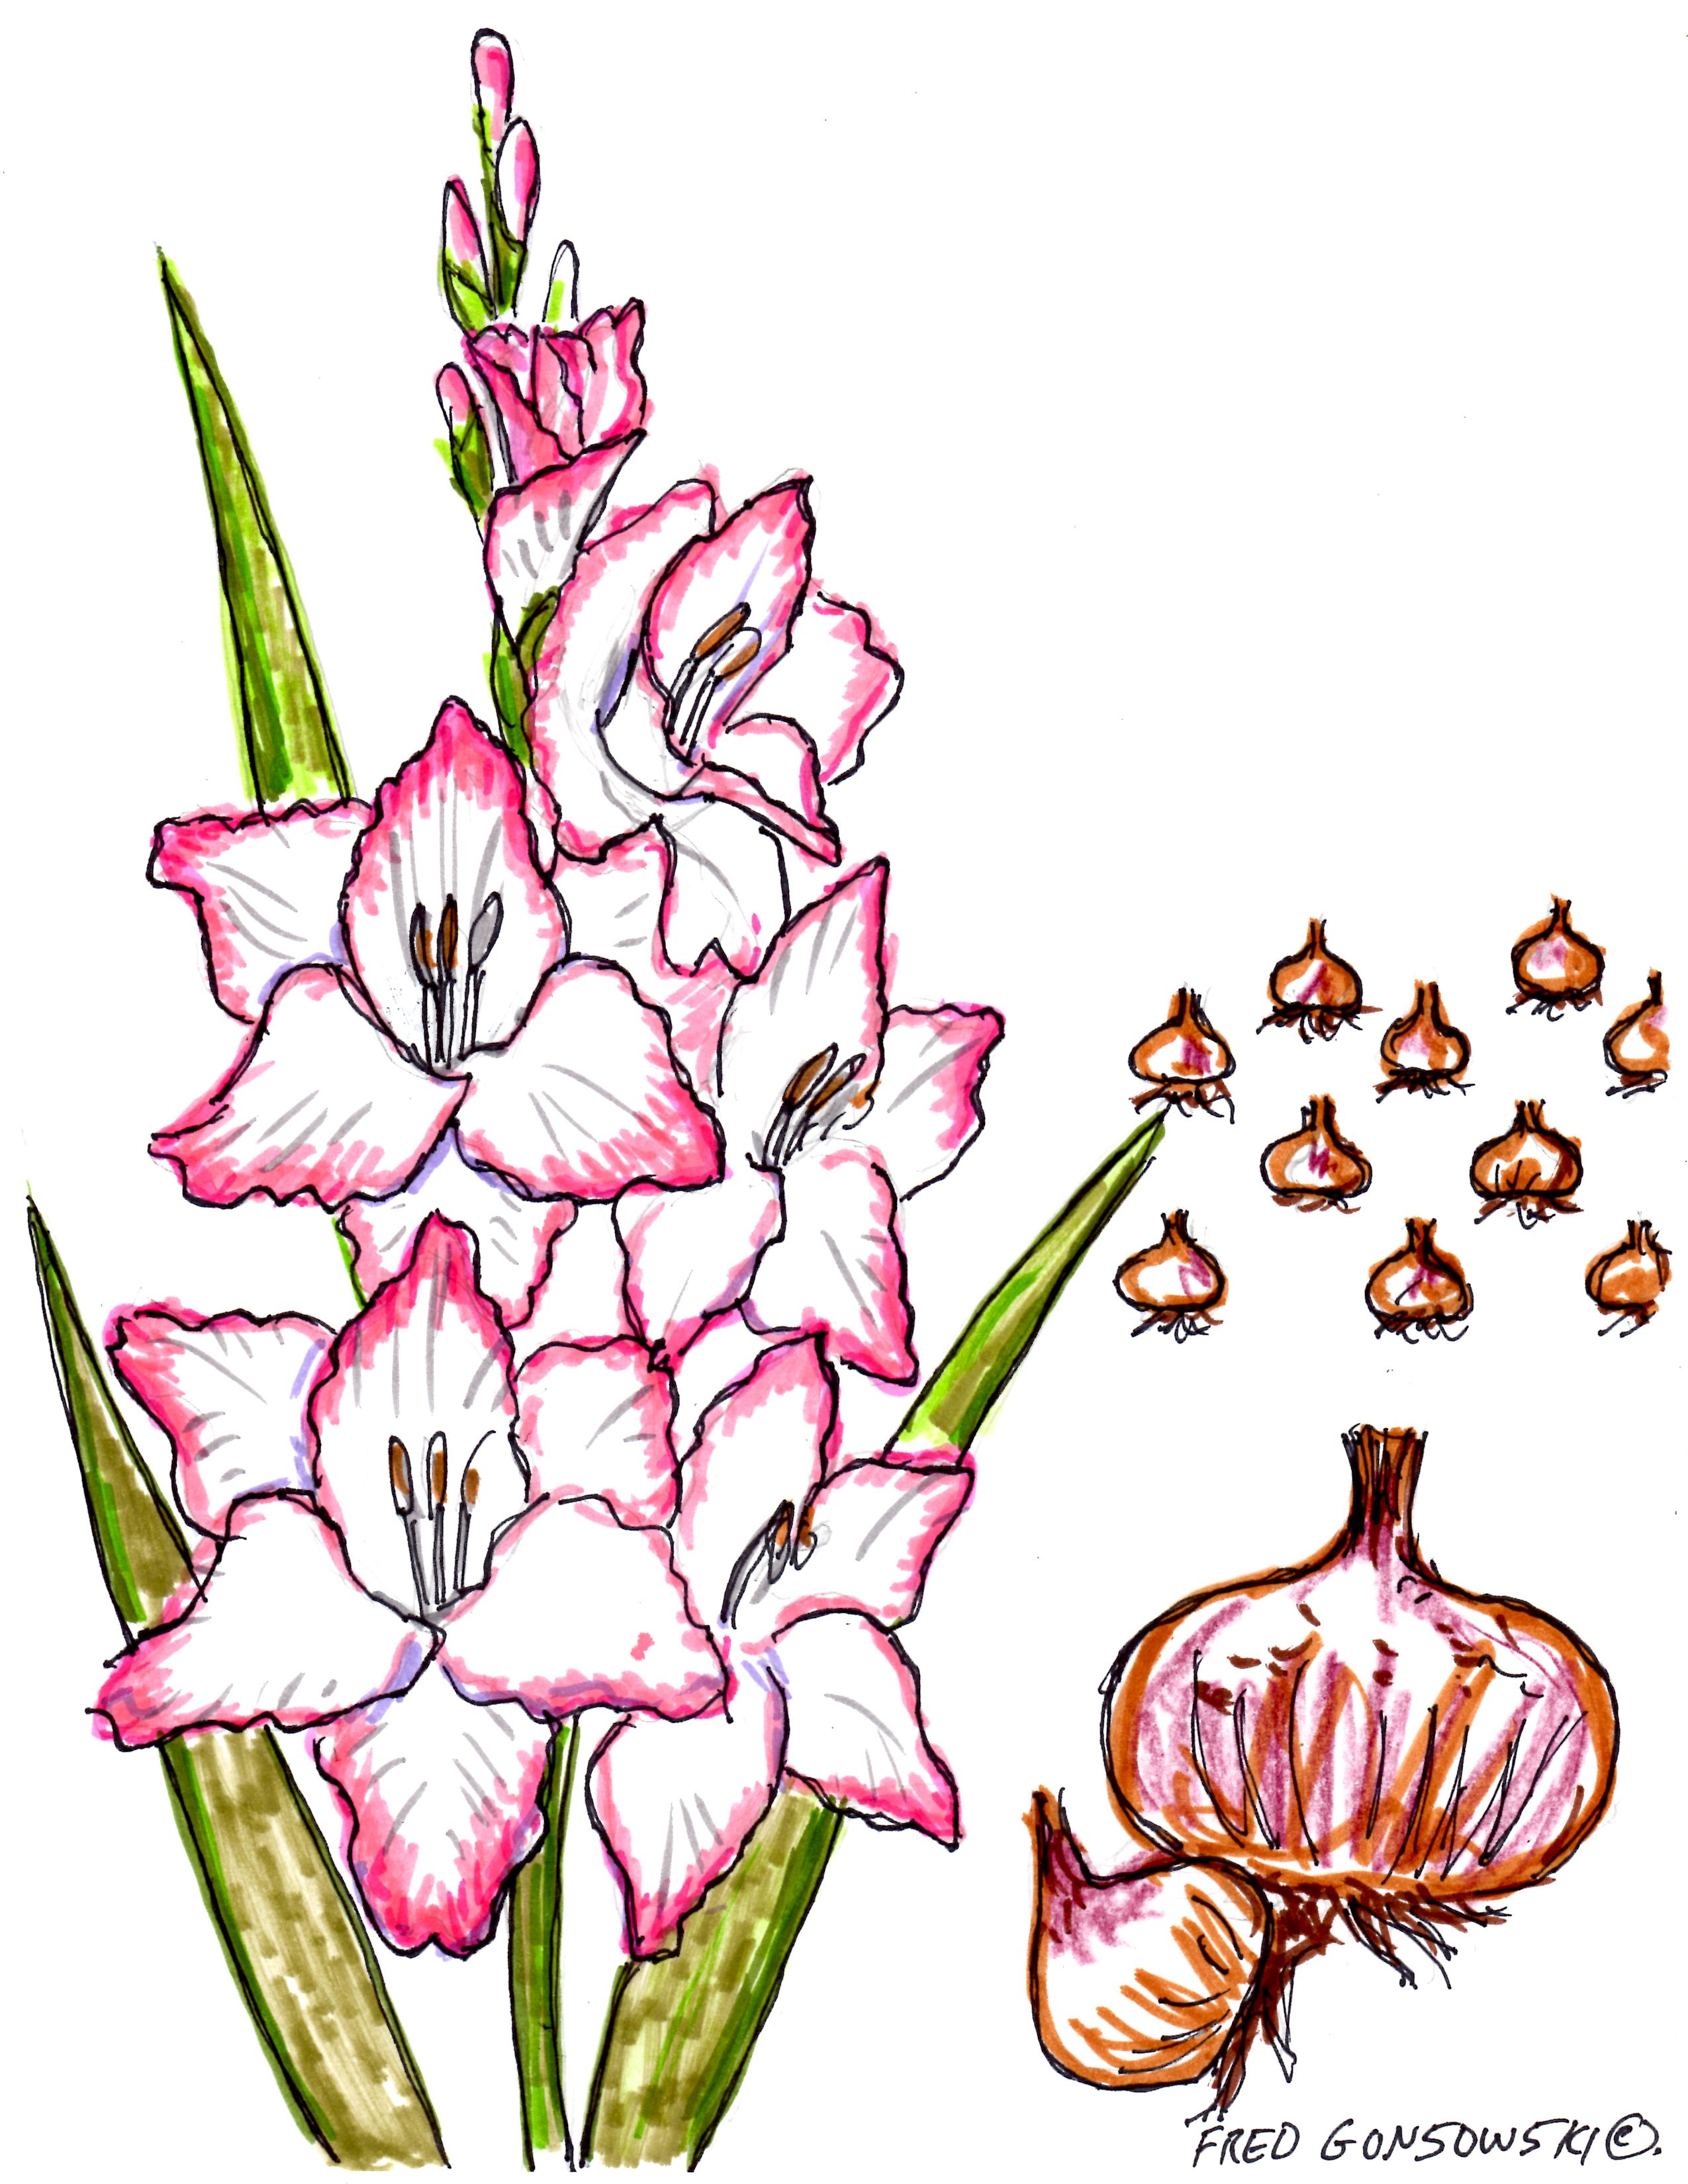 Learn how to draw Gladiolus Flower pictures using these outlines or print j...